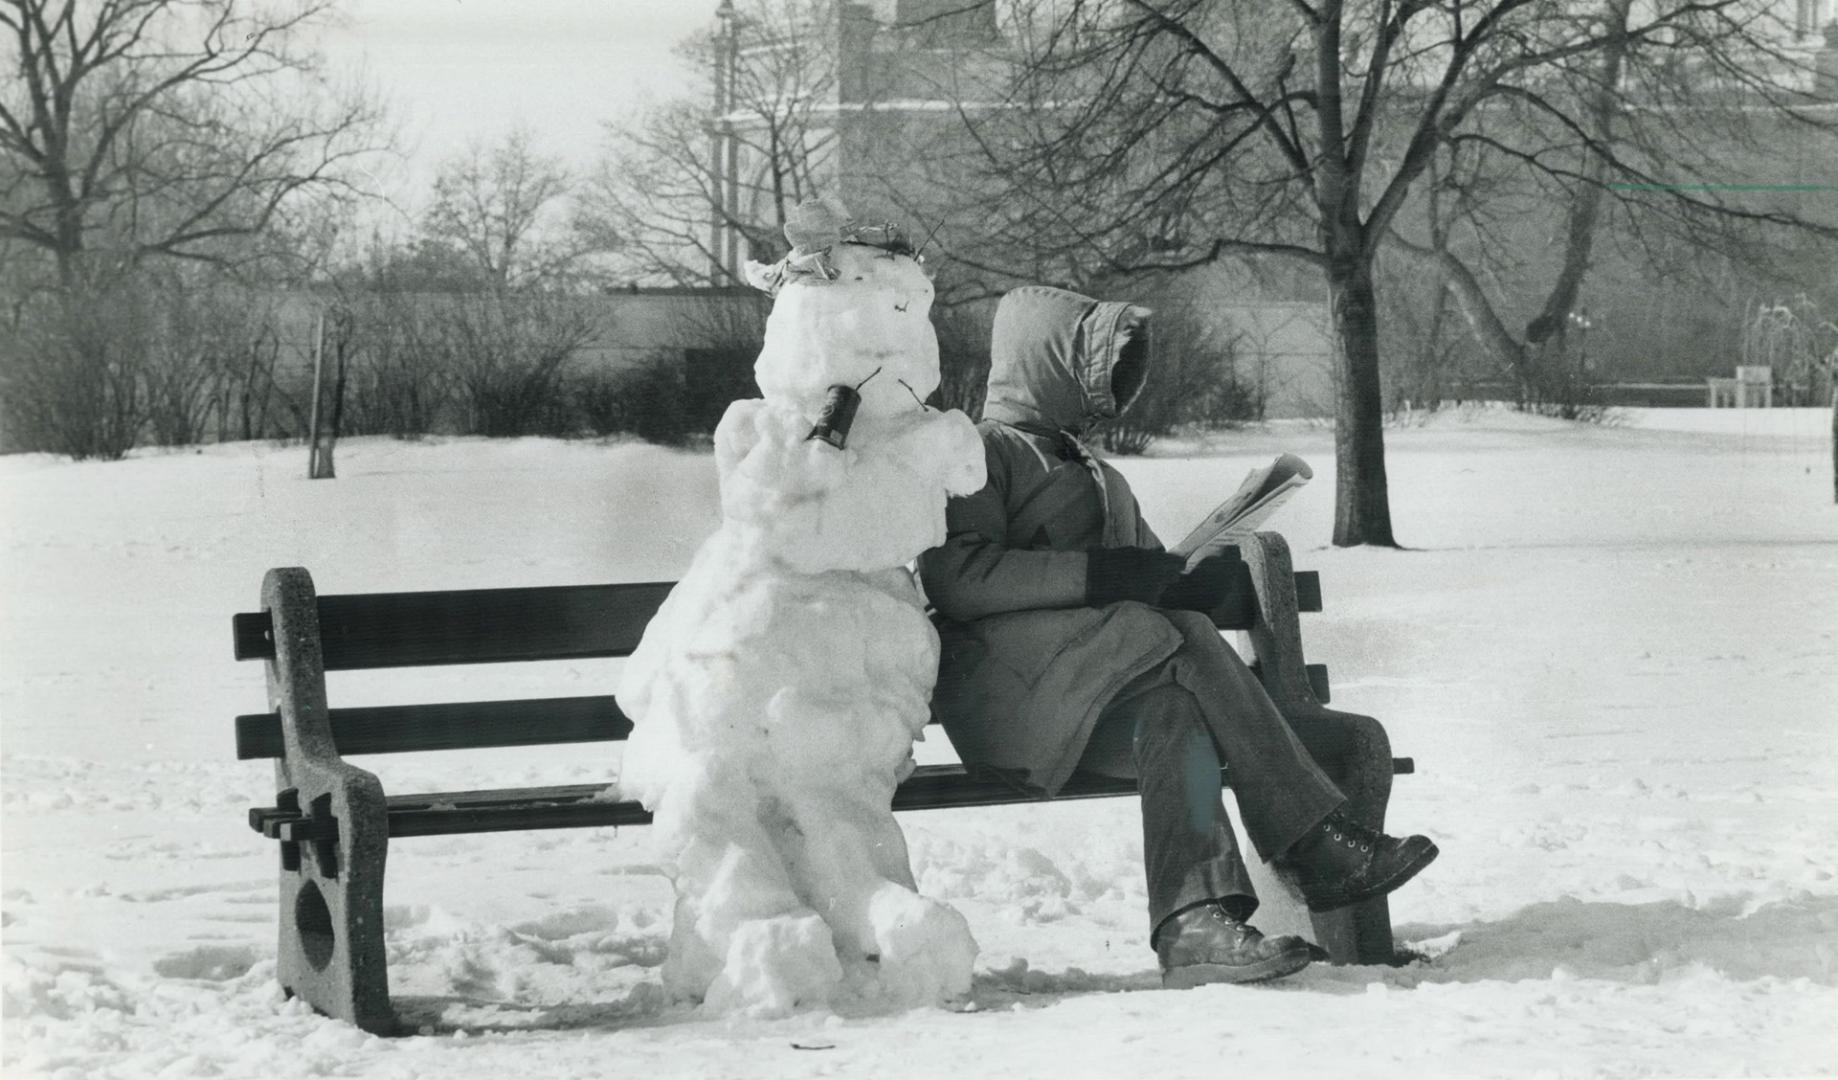 Guard against chilling encounters - like this frosty fellow on the bench - by bundling up in layered clothing